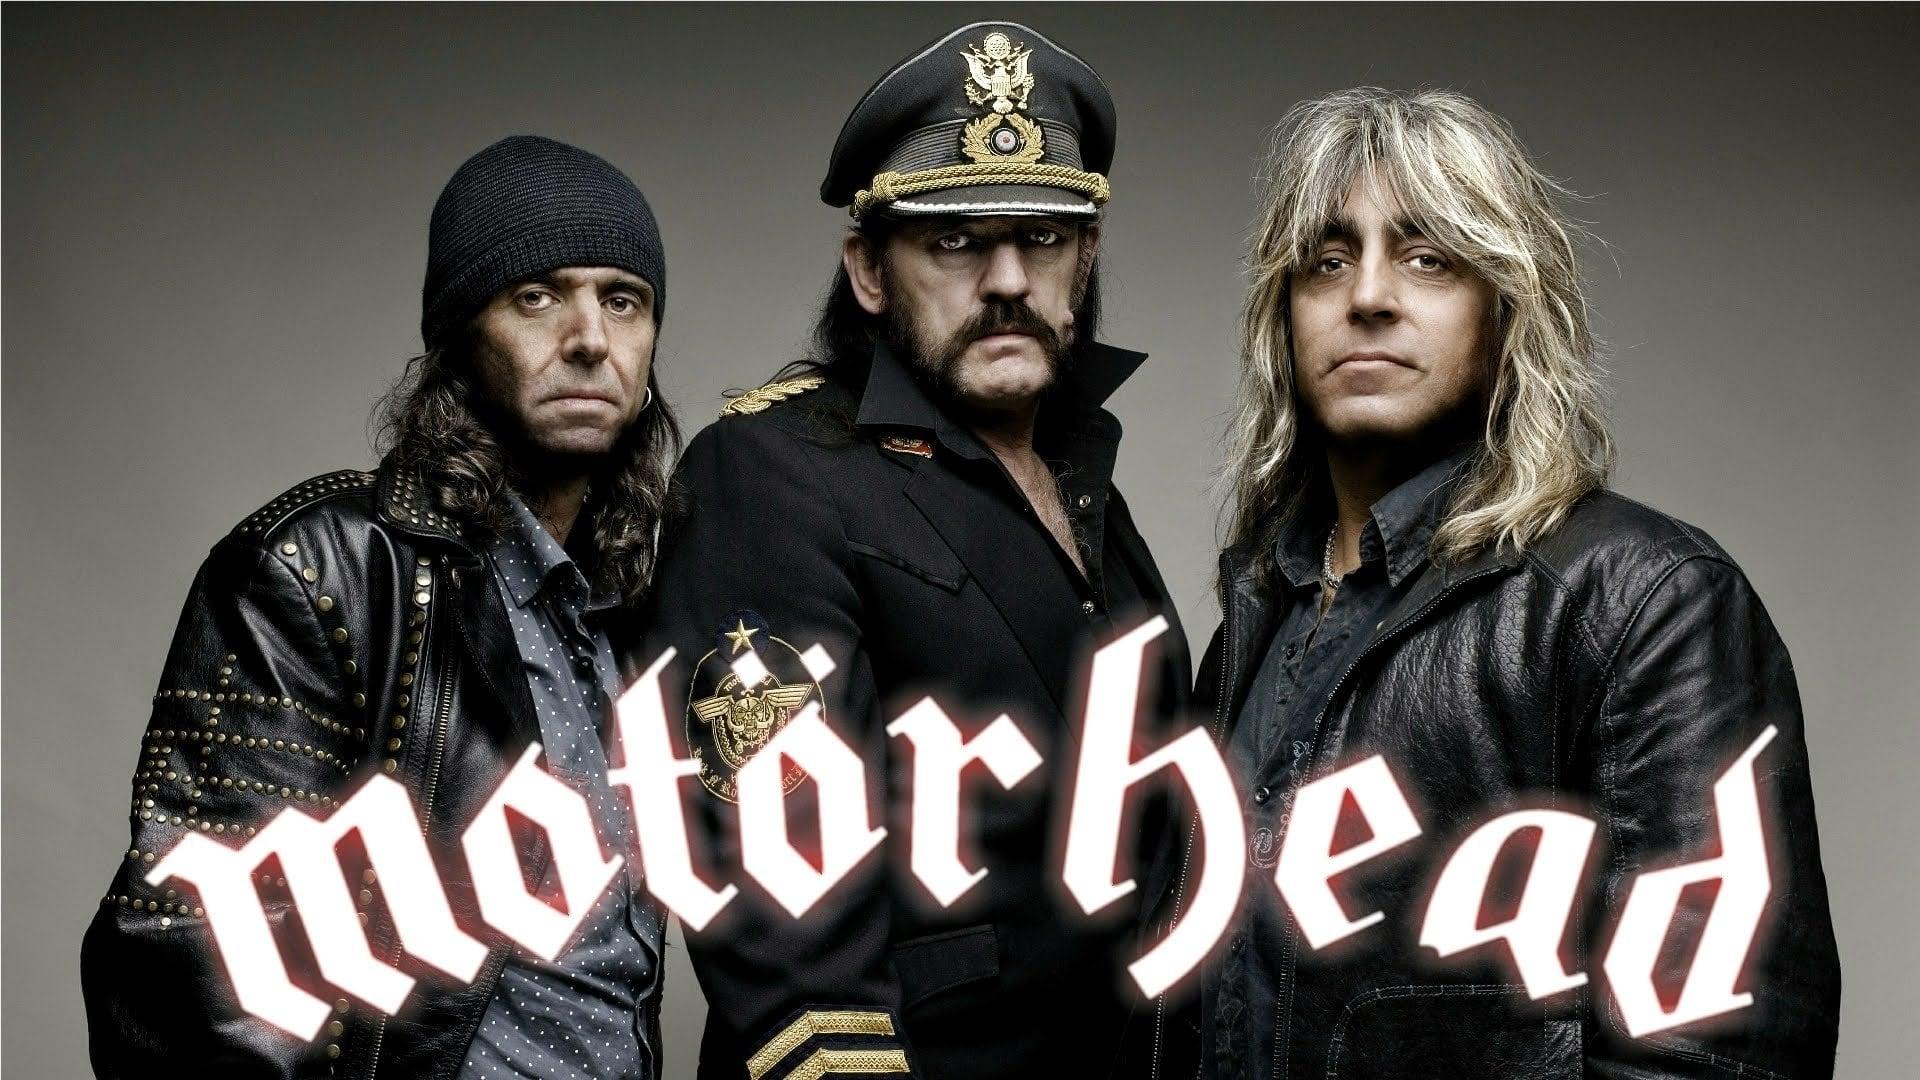 Motörhead : The Wörld Is Ours, Vol 2 - Anyplace Crazy as Anywhere Else backdrop